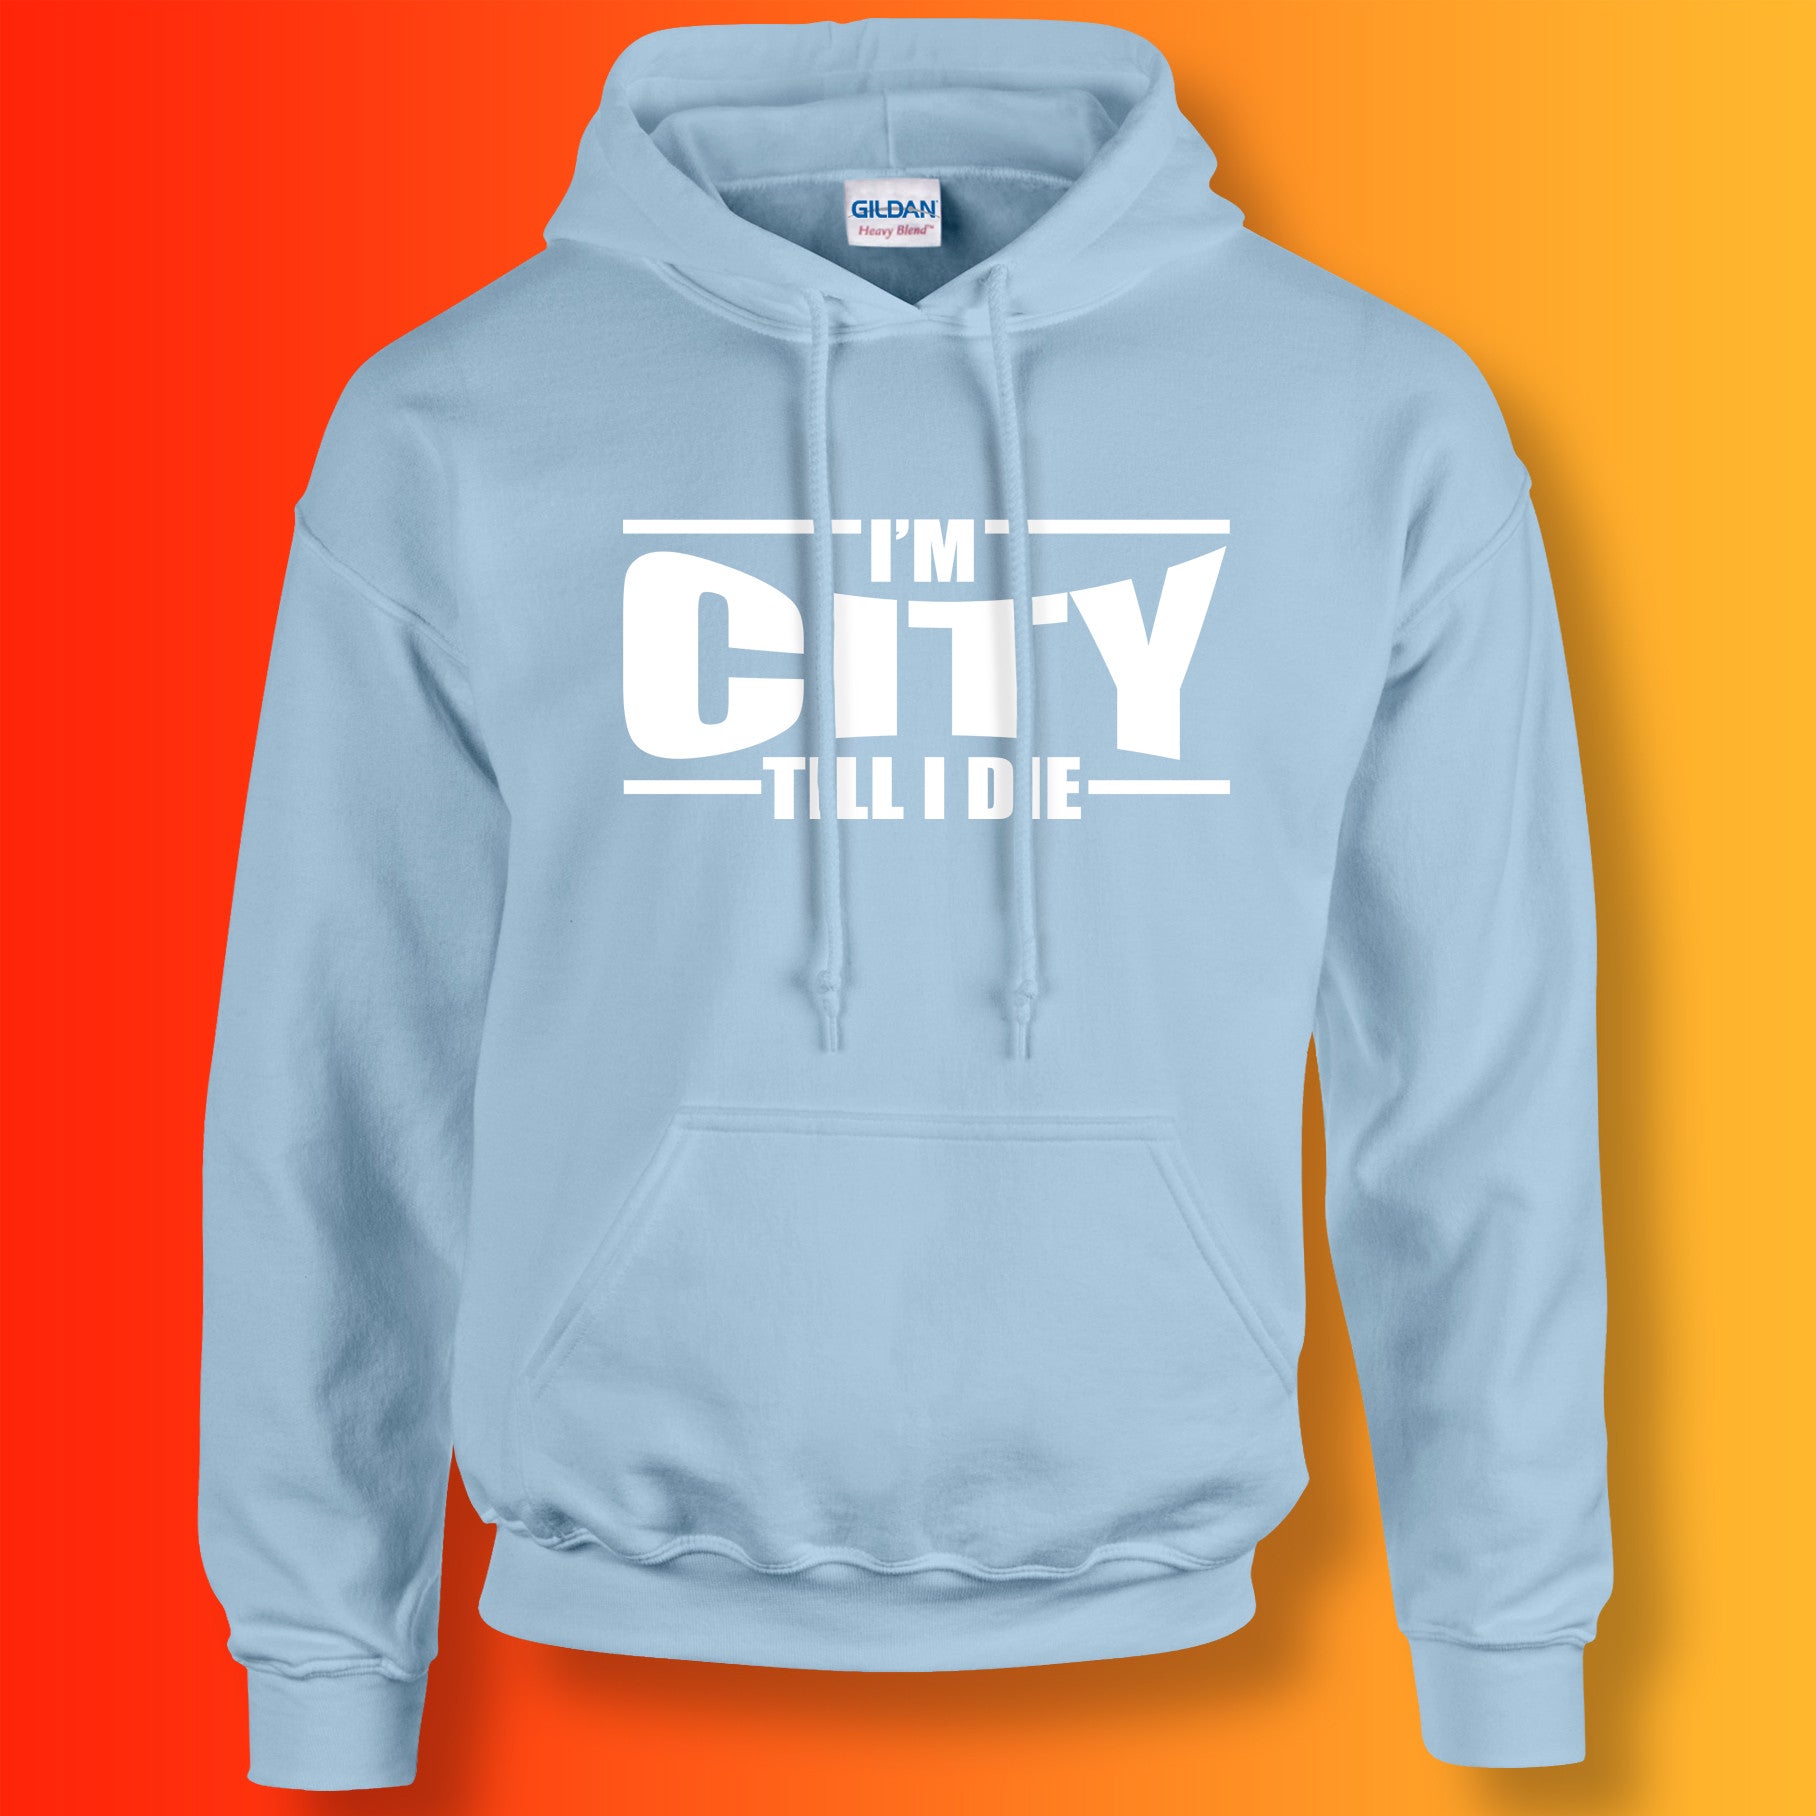 I'm City Till I Die Hoodie for Sale | Buy Premier League Clothing ...